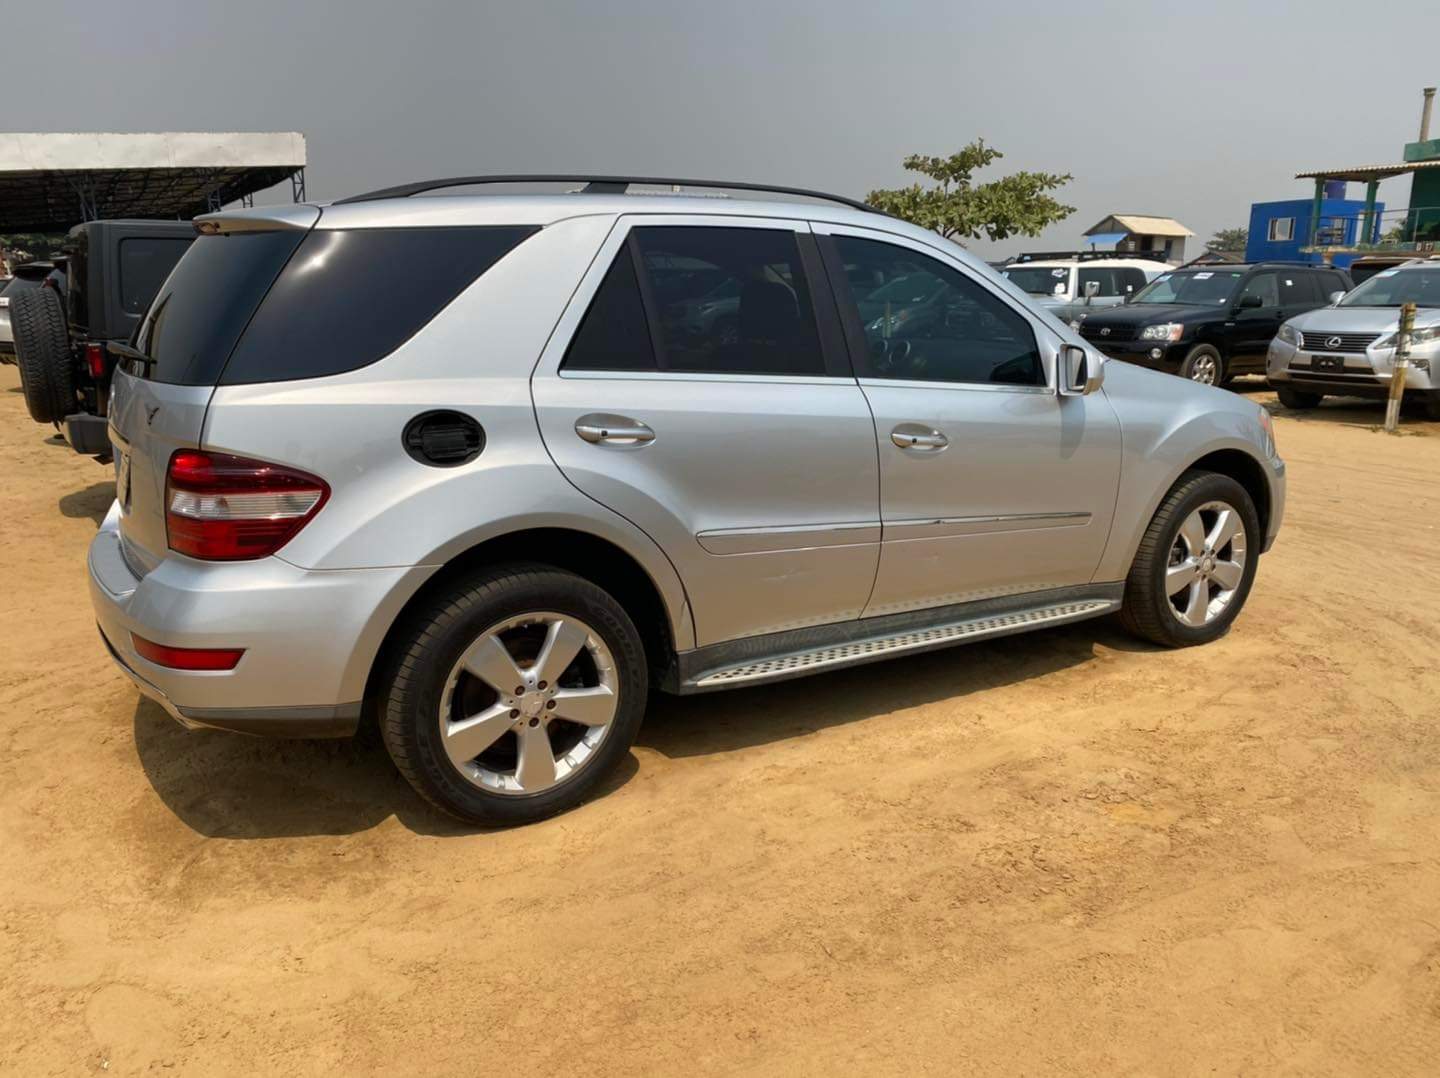 You are currently viewing Price of Mercedes Benz ML350 in Nigeria, Lagos by cotonou